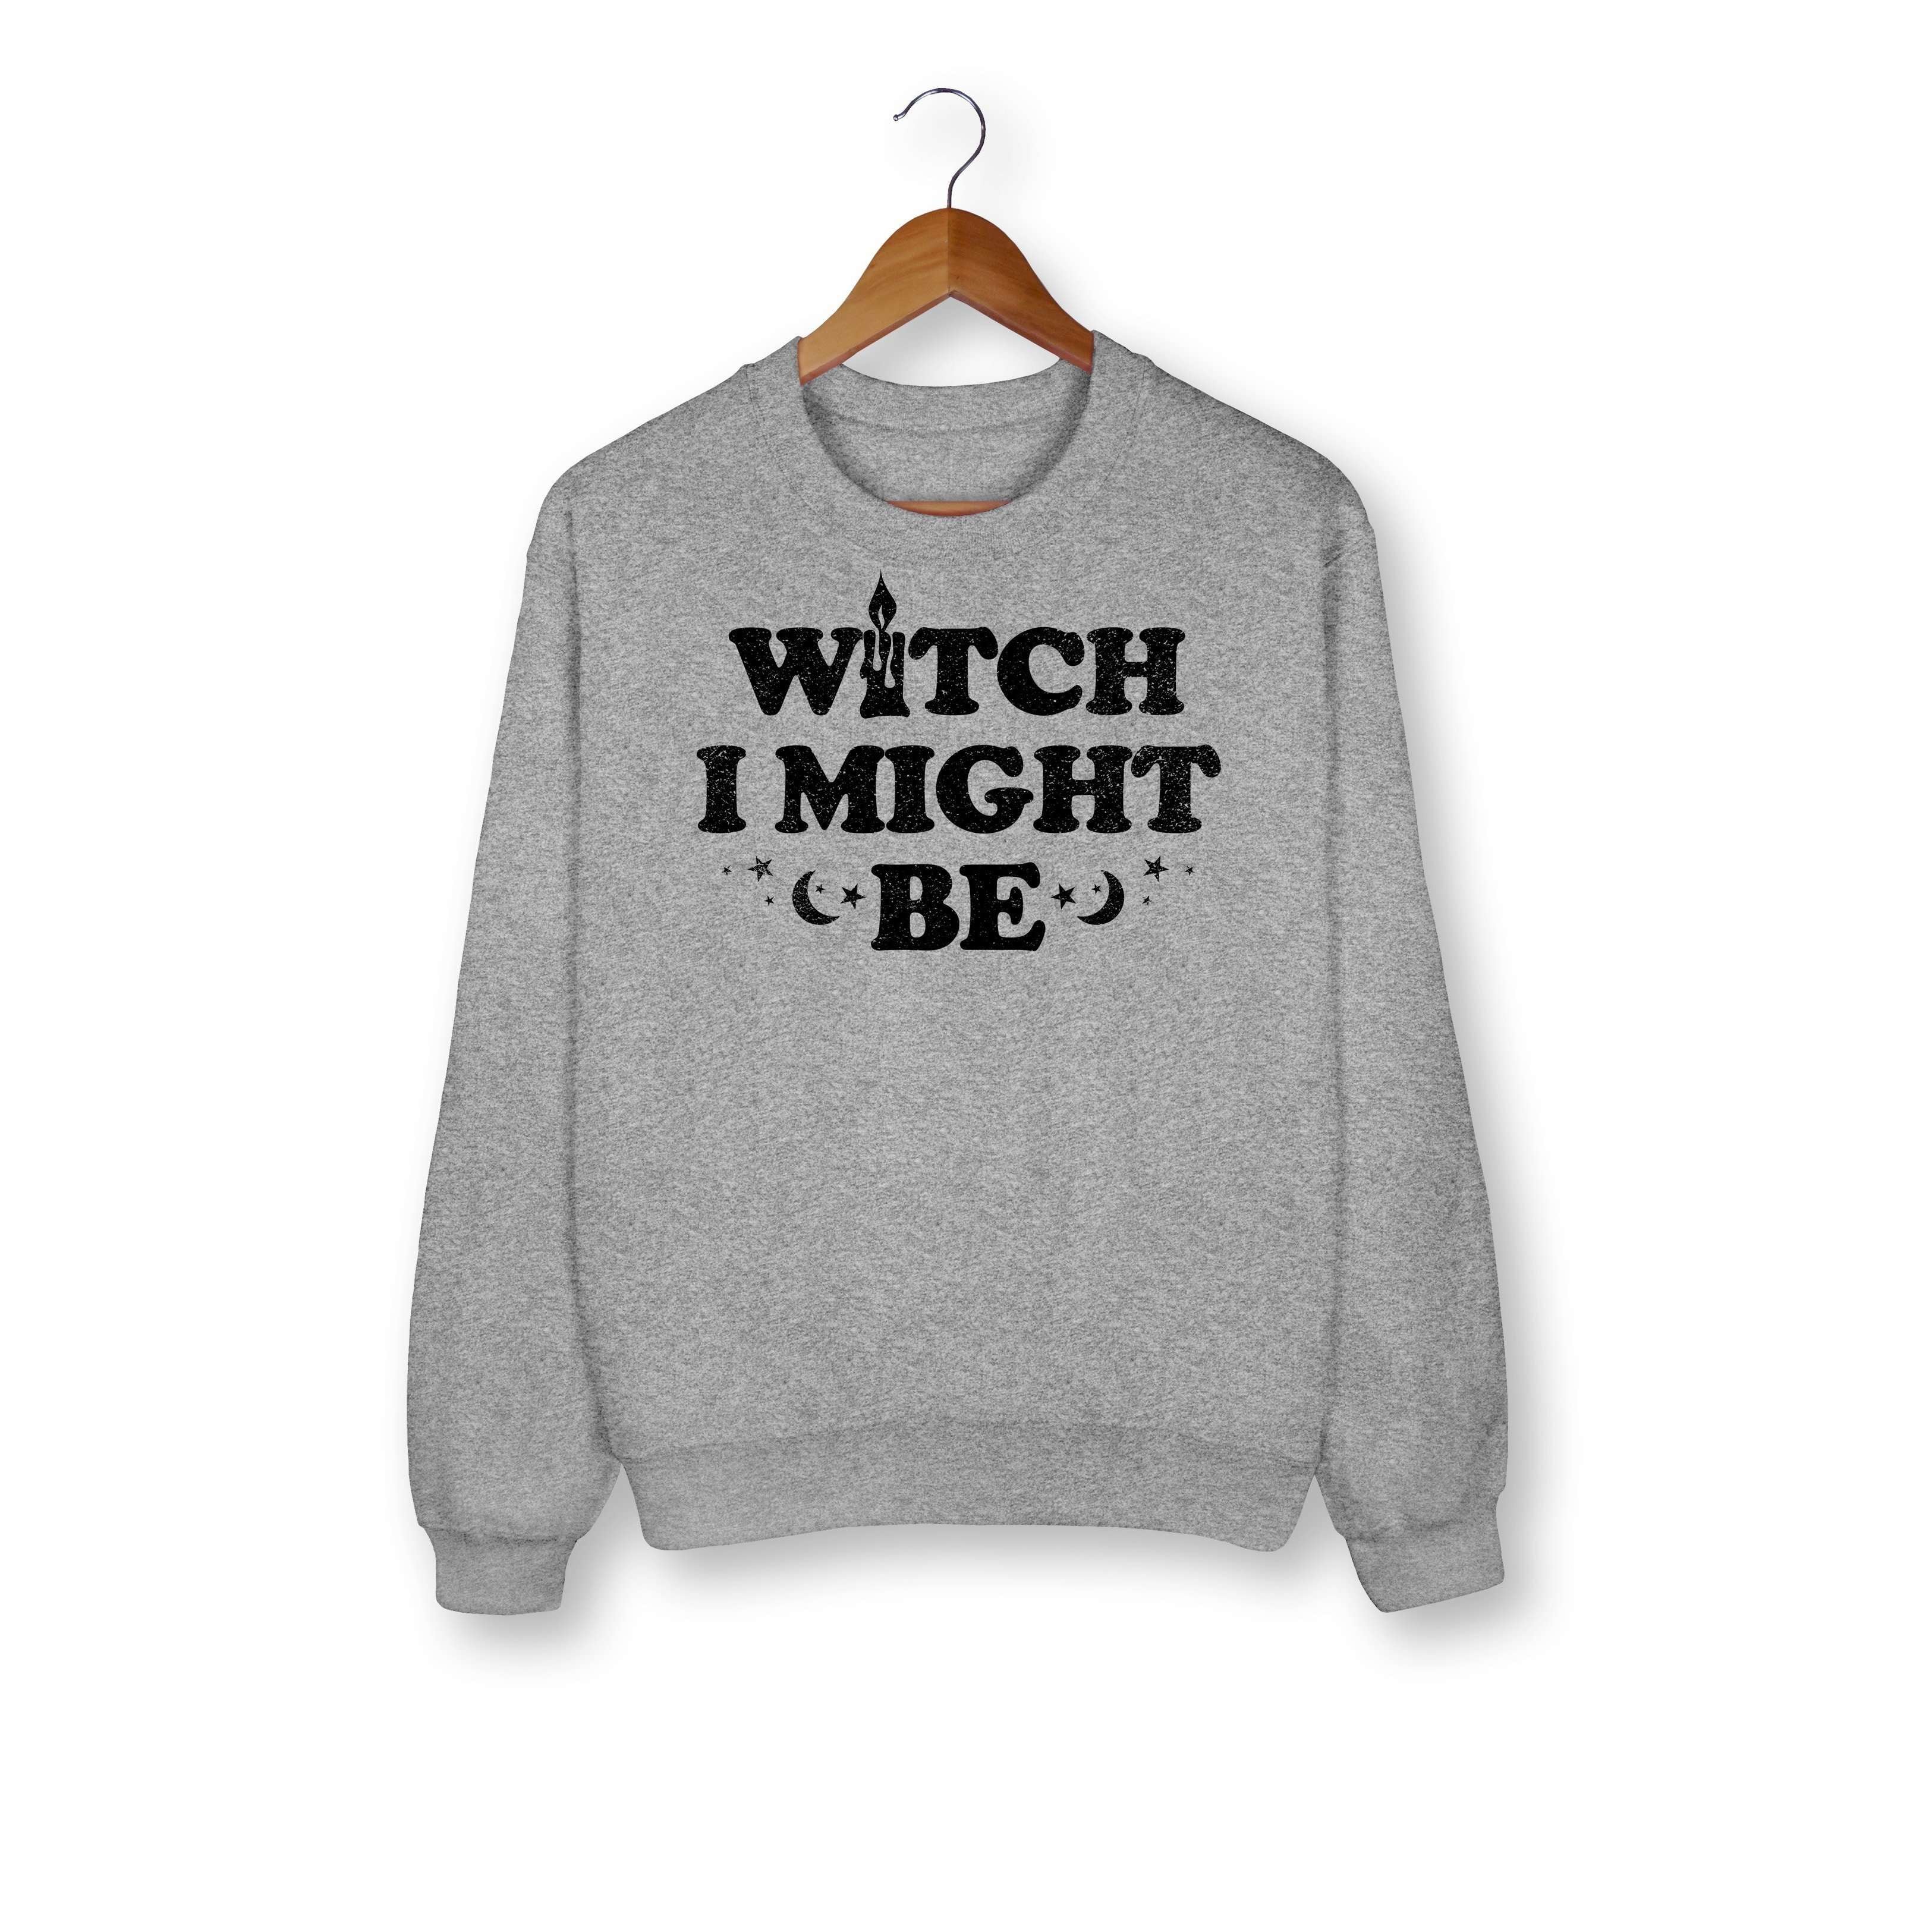 Witch I Might Be Sweatshirt